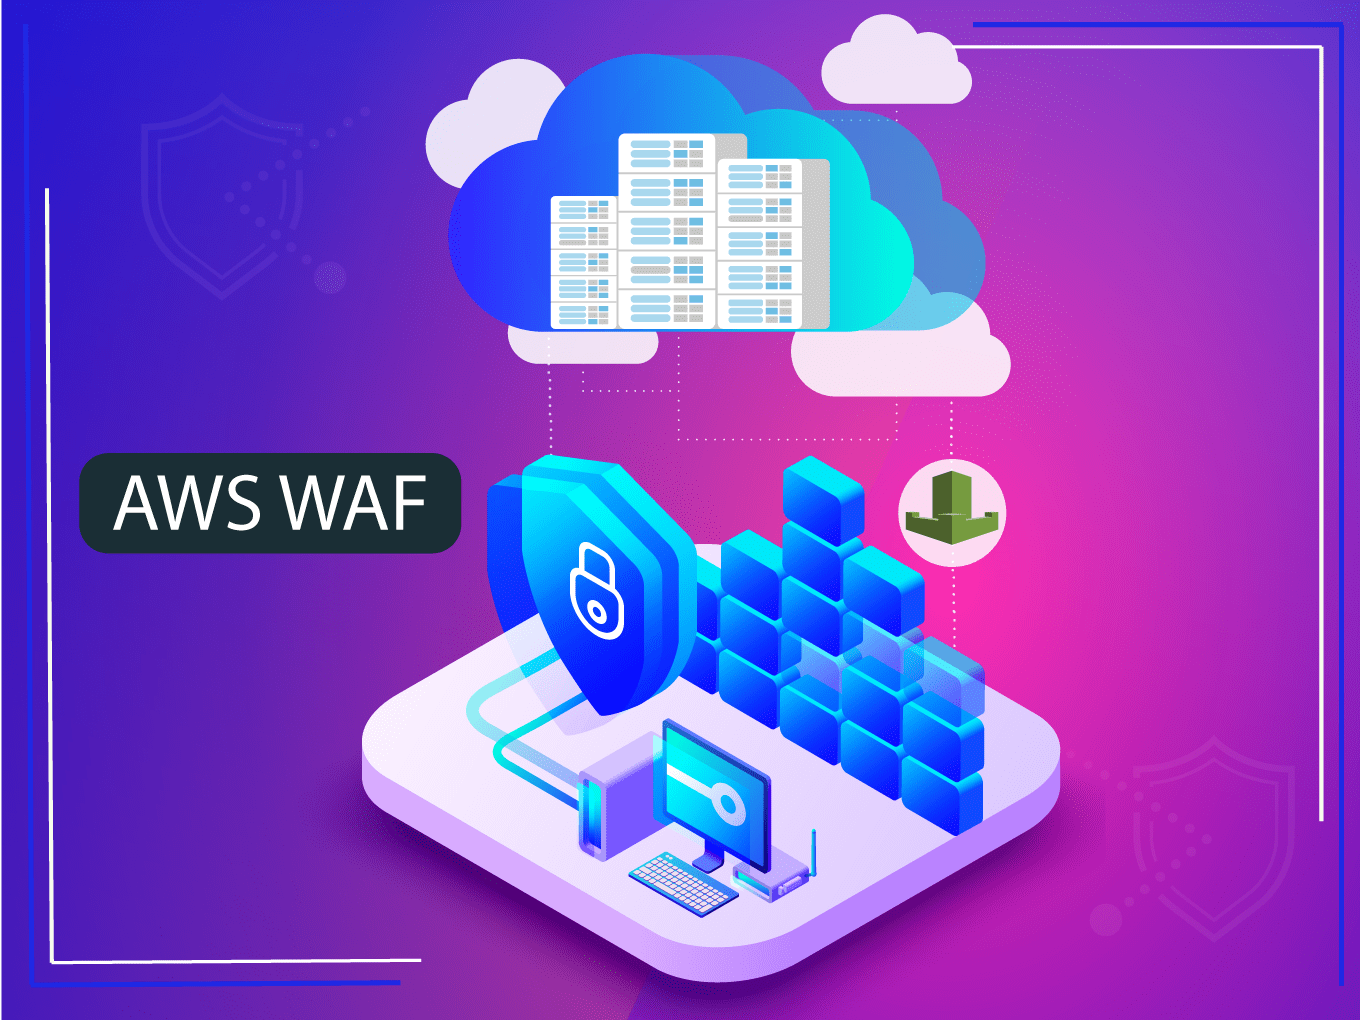 AWS WAF helps Organizations to secure their web applications from common web exploits banner image